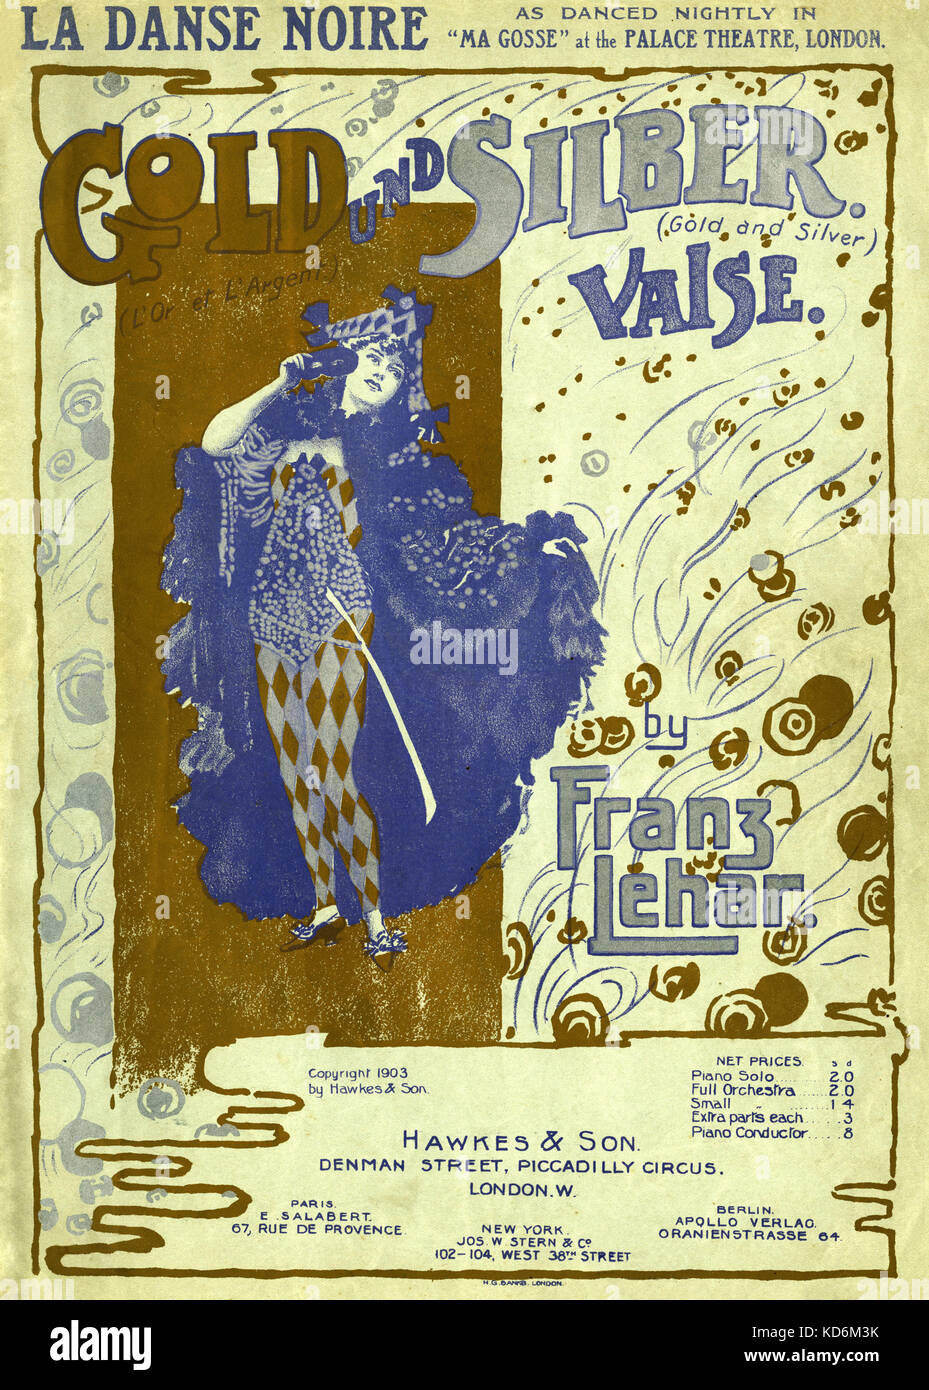 ' Gold und Silber  Valse'  (Gold and Silver Waltz) by Franz Lehar. 30 April 1870 - 24 October 1948.   Score cover reads 'La Danse Noire - As danced nightly  in ' Ma Gosse' at the Palace Theatre, London''  . Hawkes and Son, London, 1903 Stock Photo